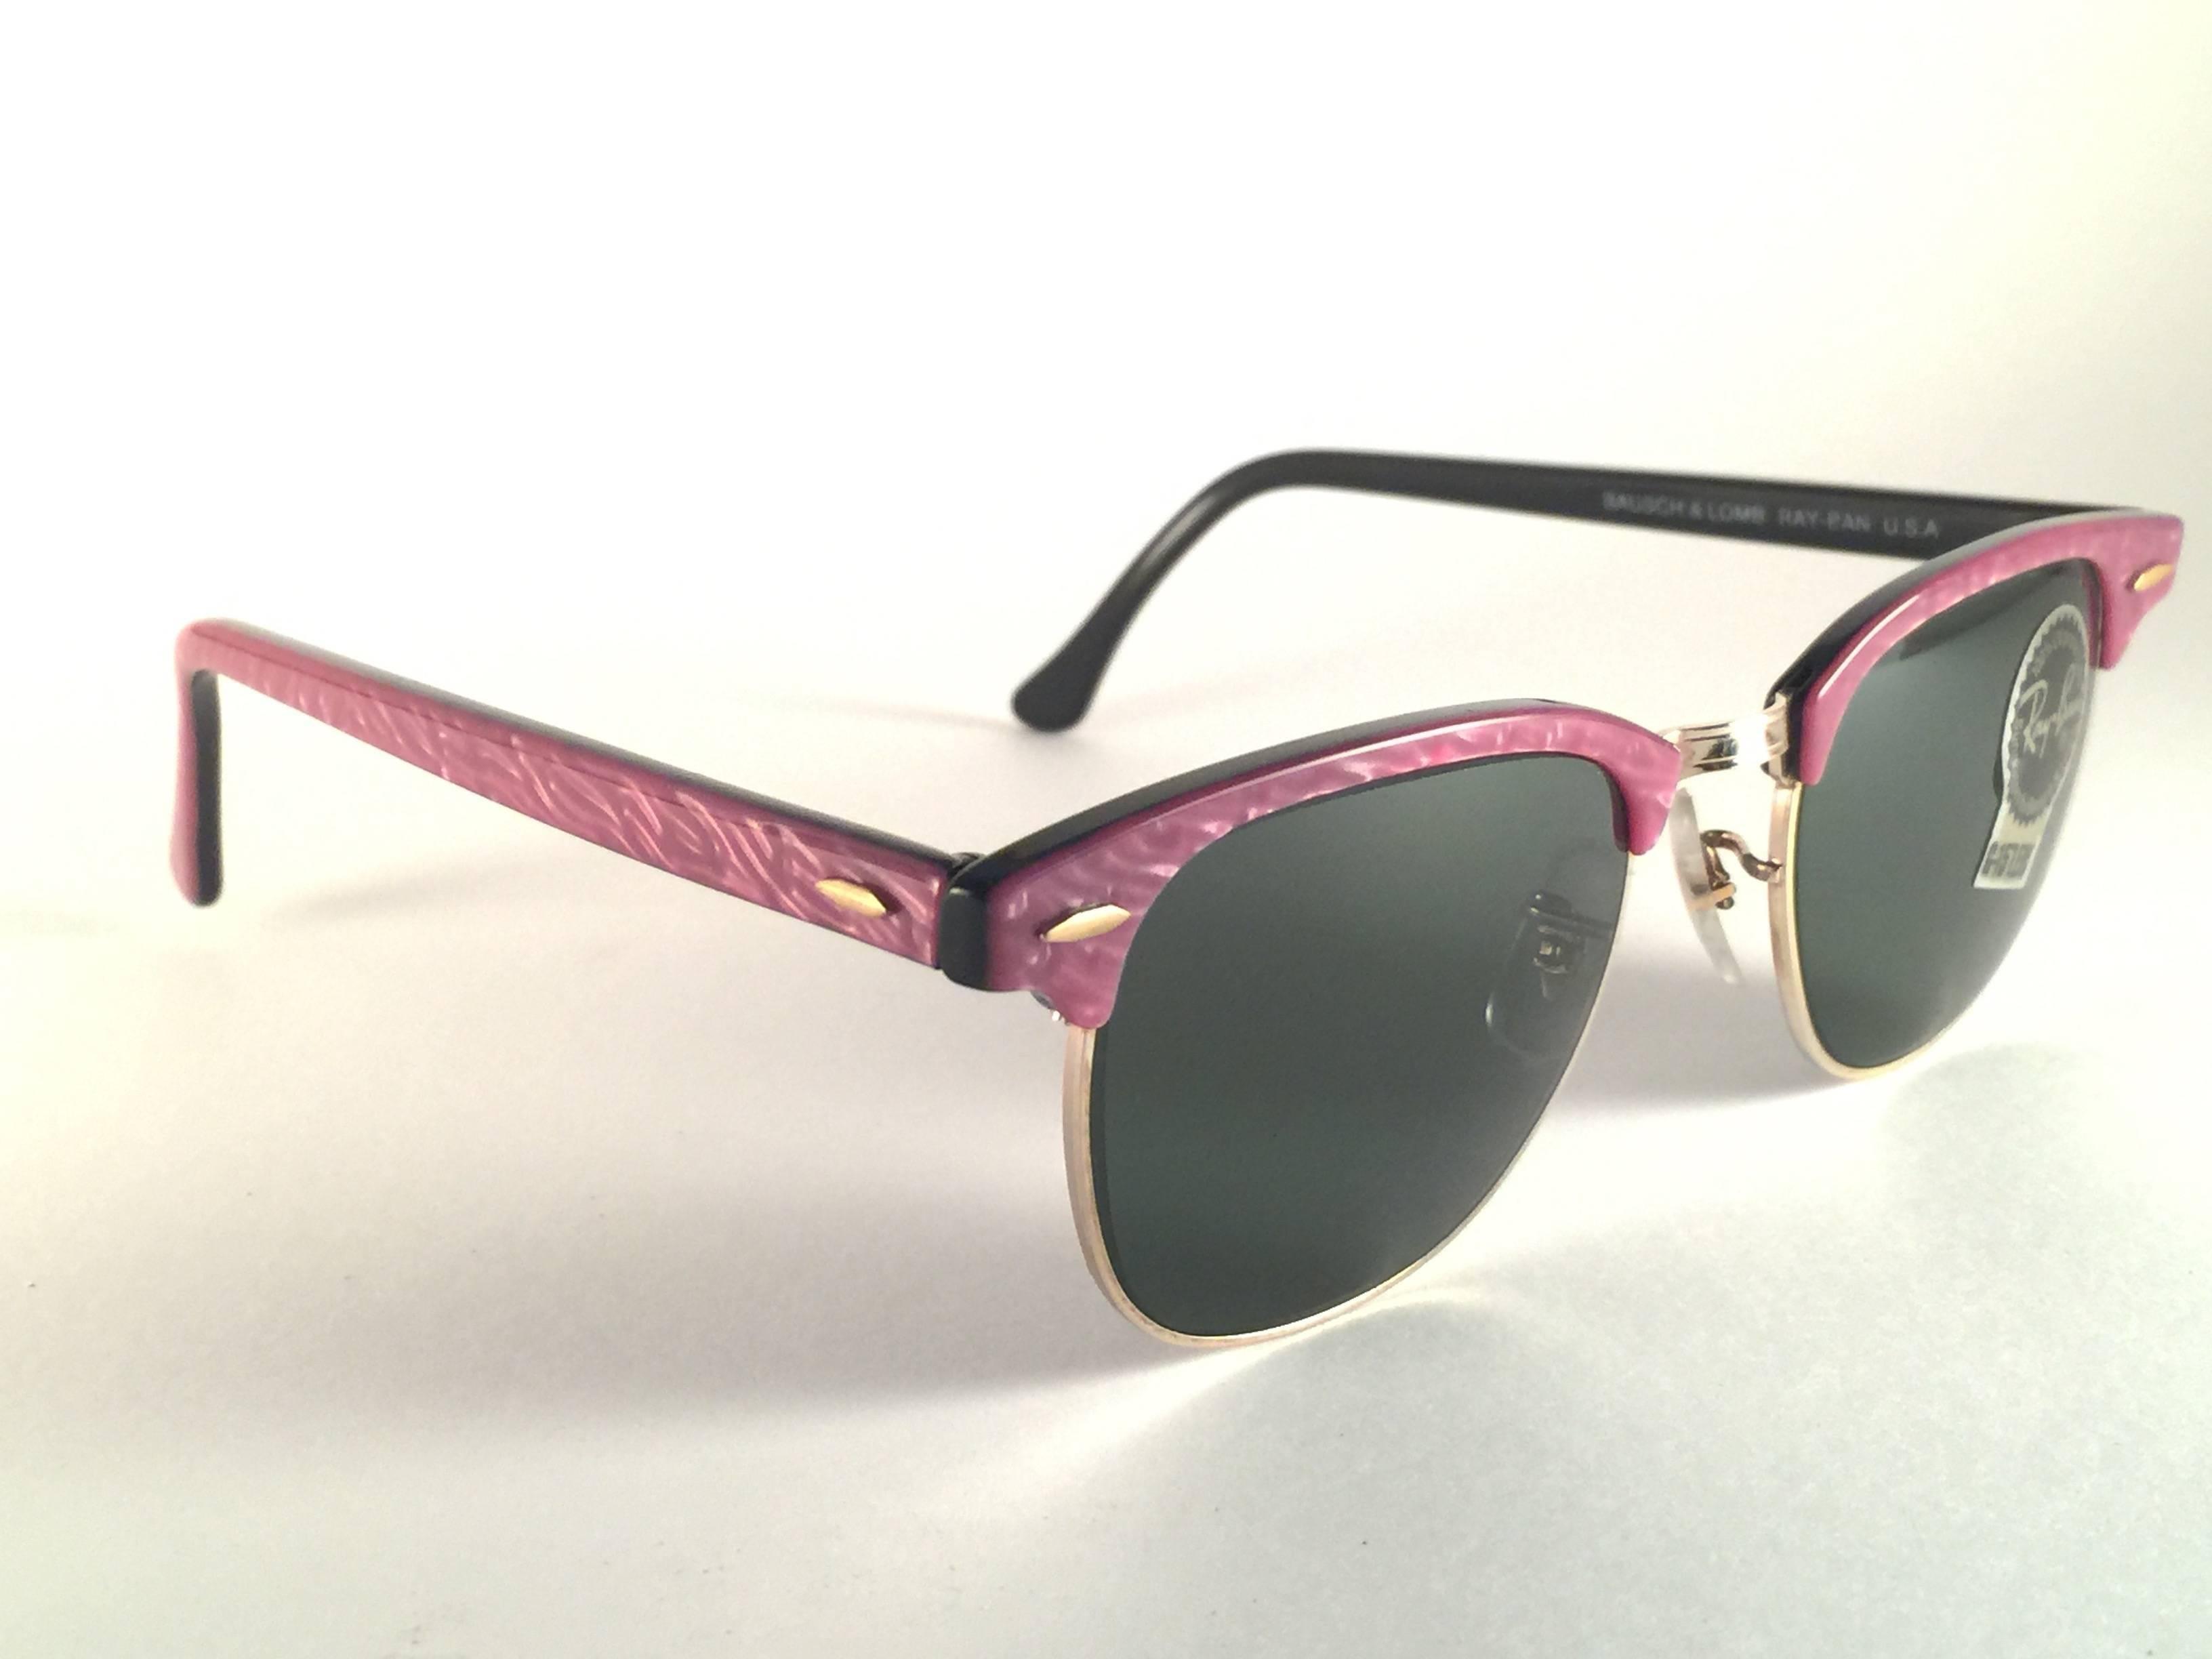 New classic Clubmasterin raspberry and gold. B&L etched in both G15 grey lenses. Please notice that this item is nearly 40 years old and could show some storage wear.  New, ever worn or displayed.